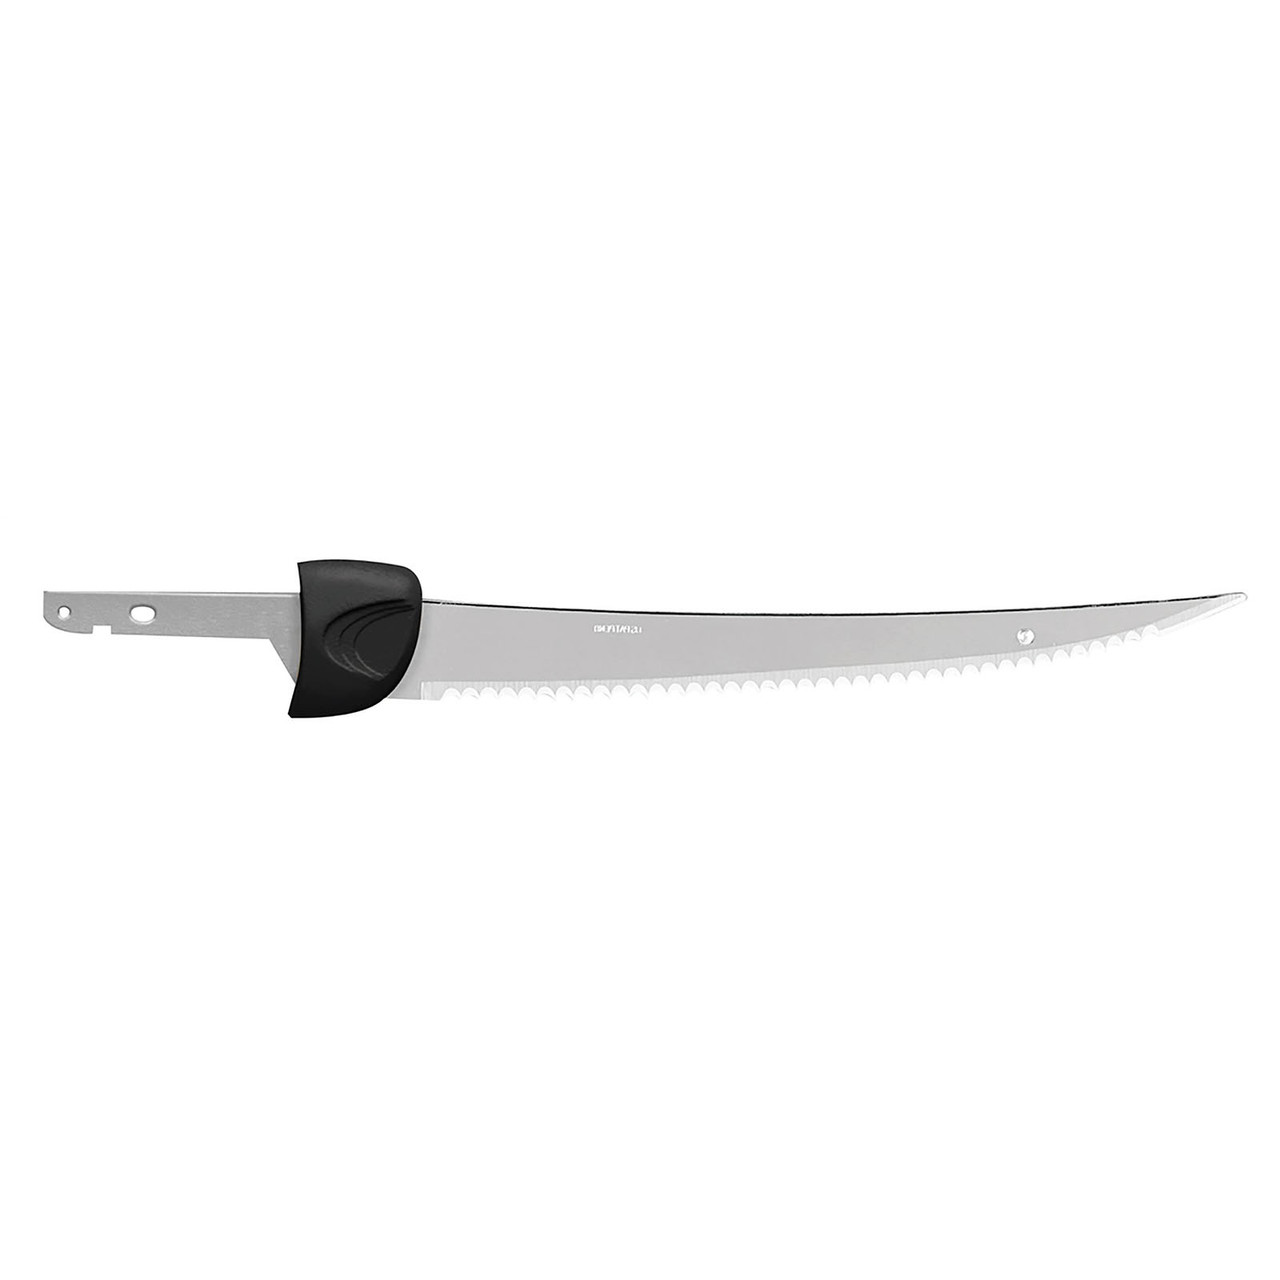 American Angler 8 in. Curved Tip Electric Fillet Knife Replacement